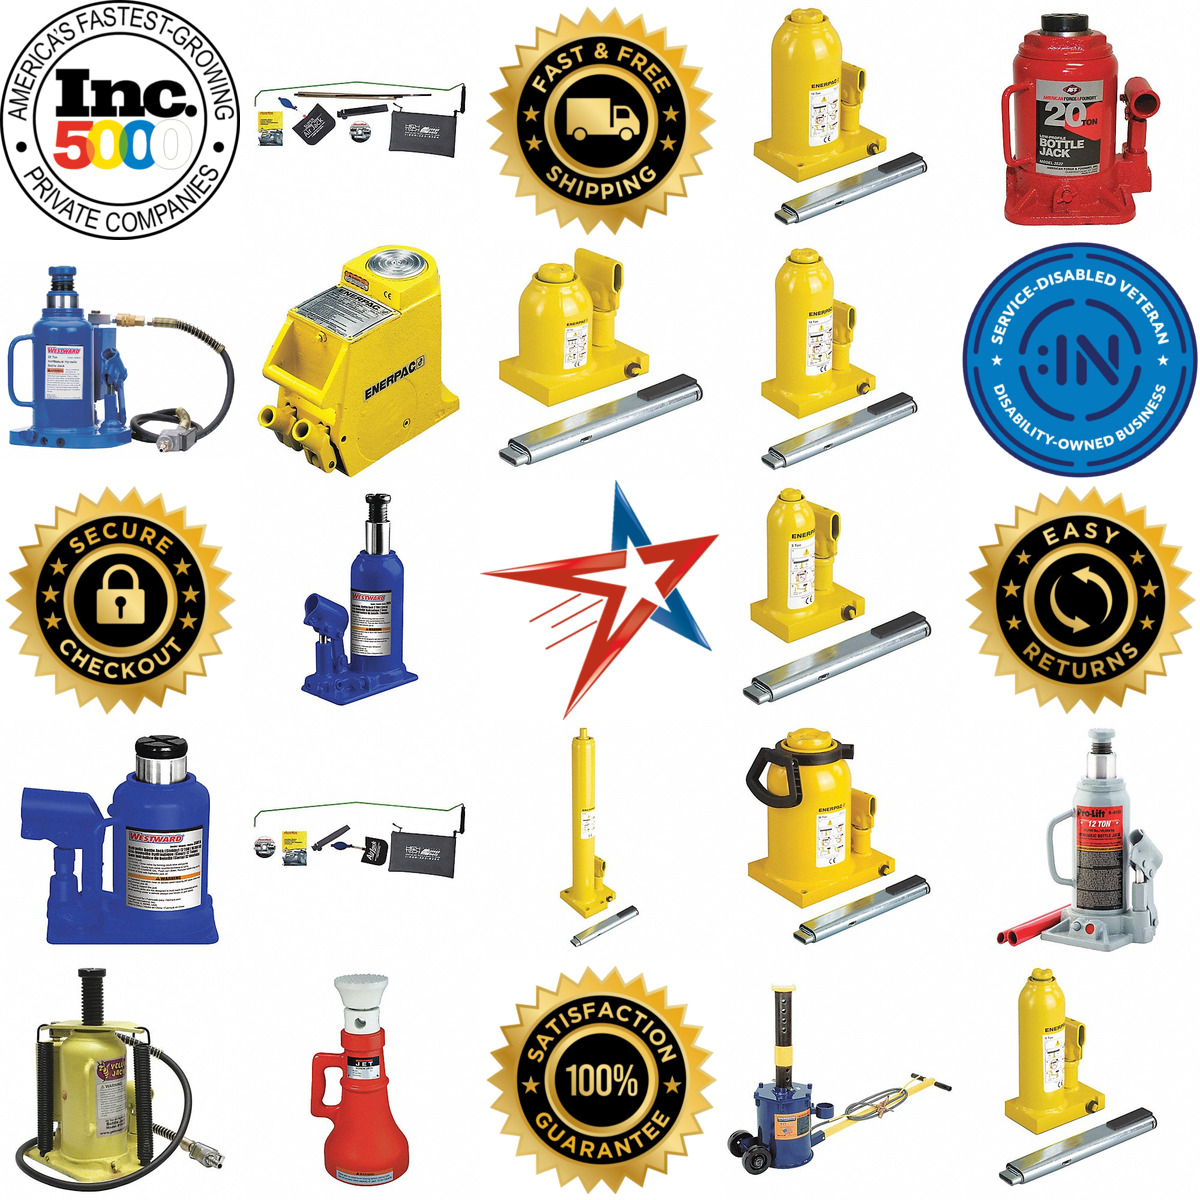 A selection of Bottle Jacks products on GoVets